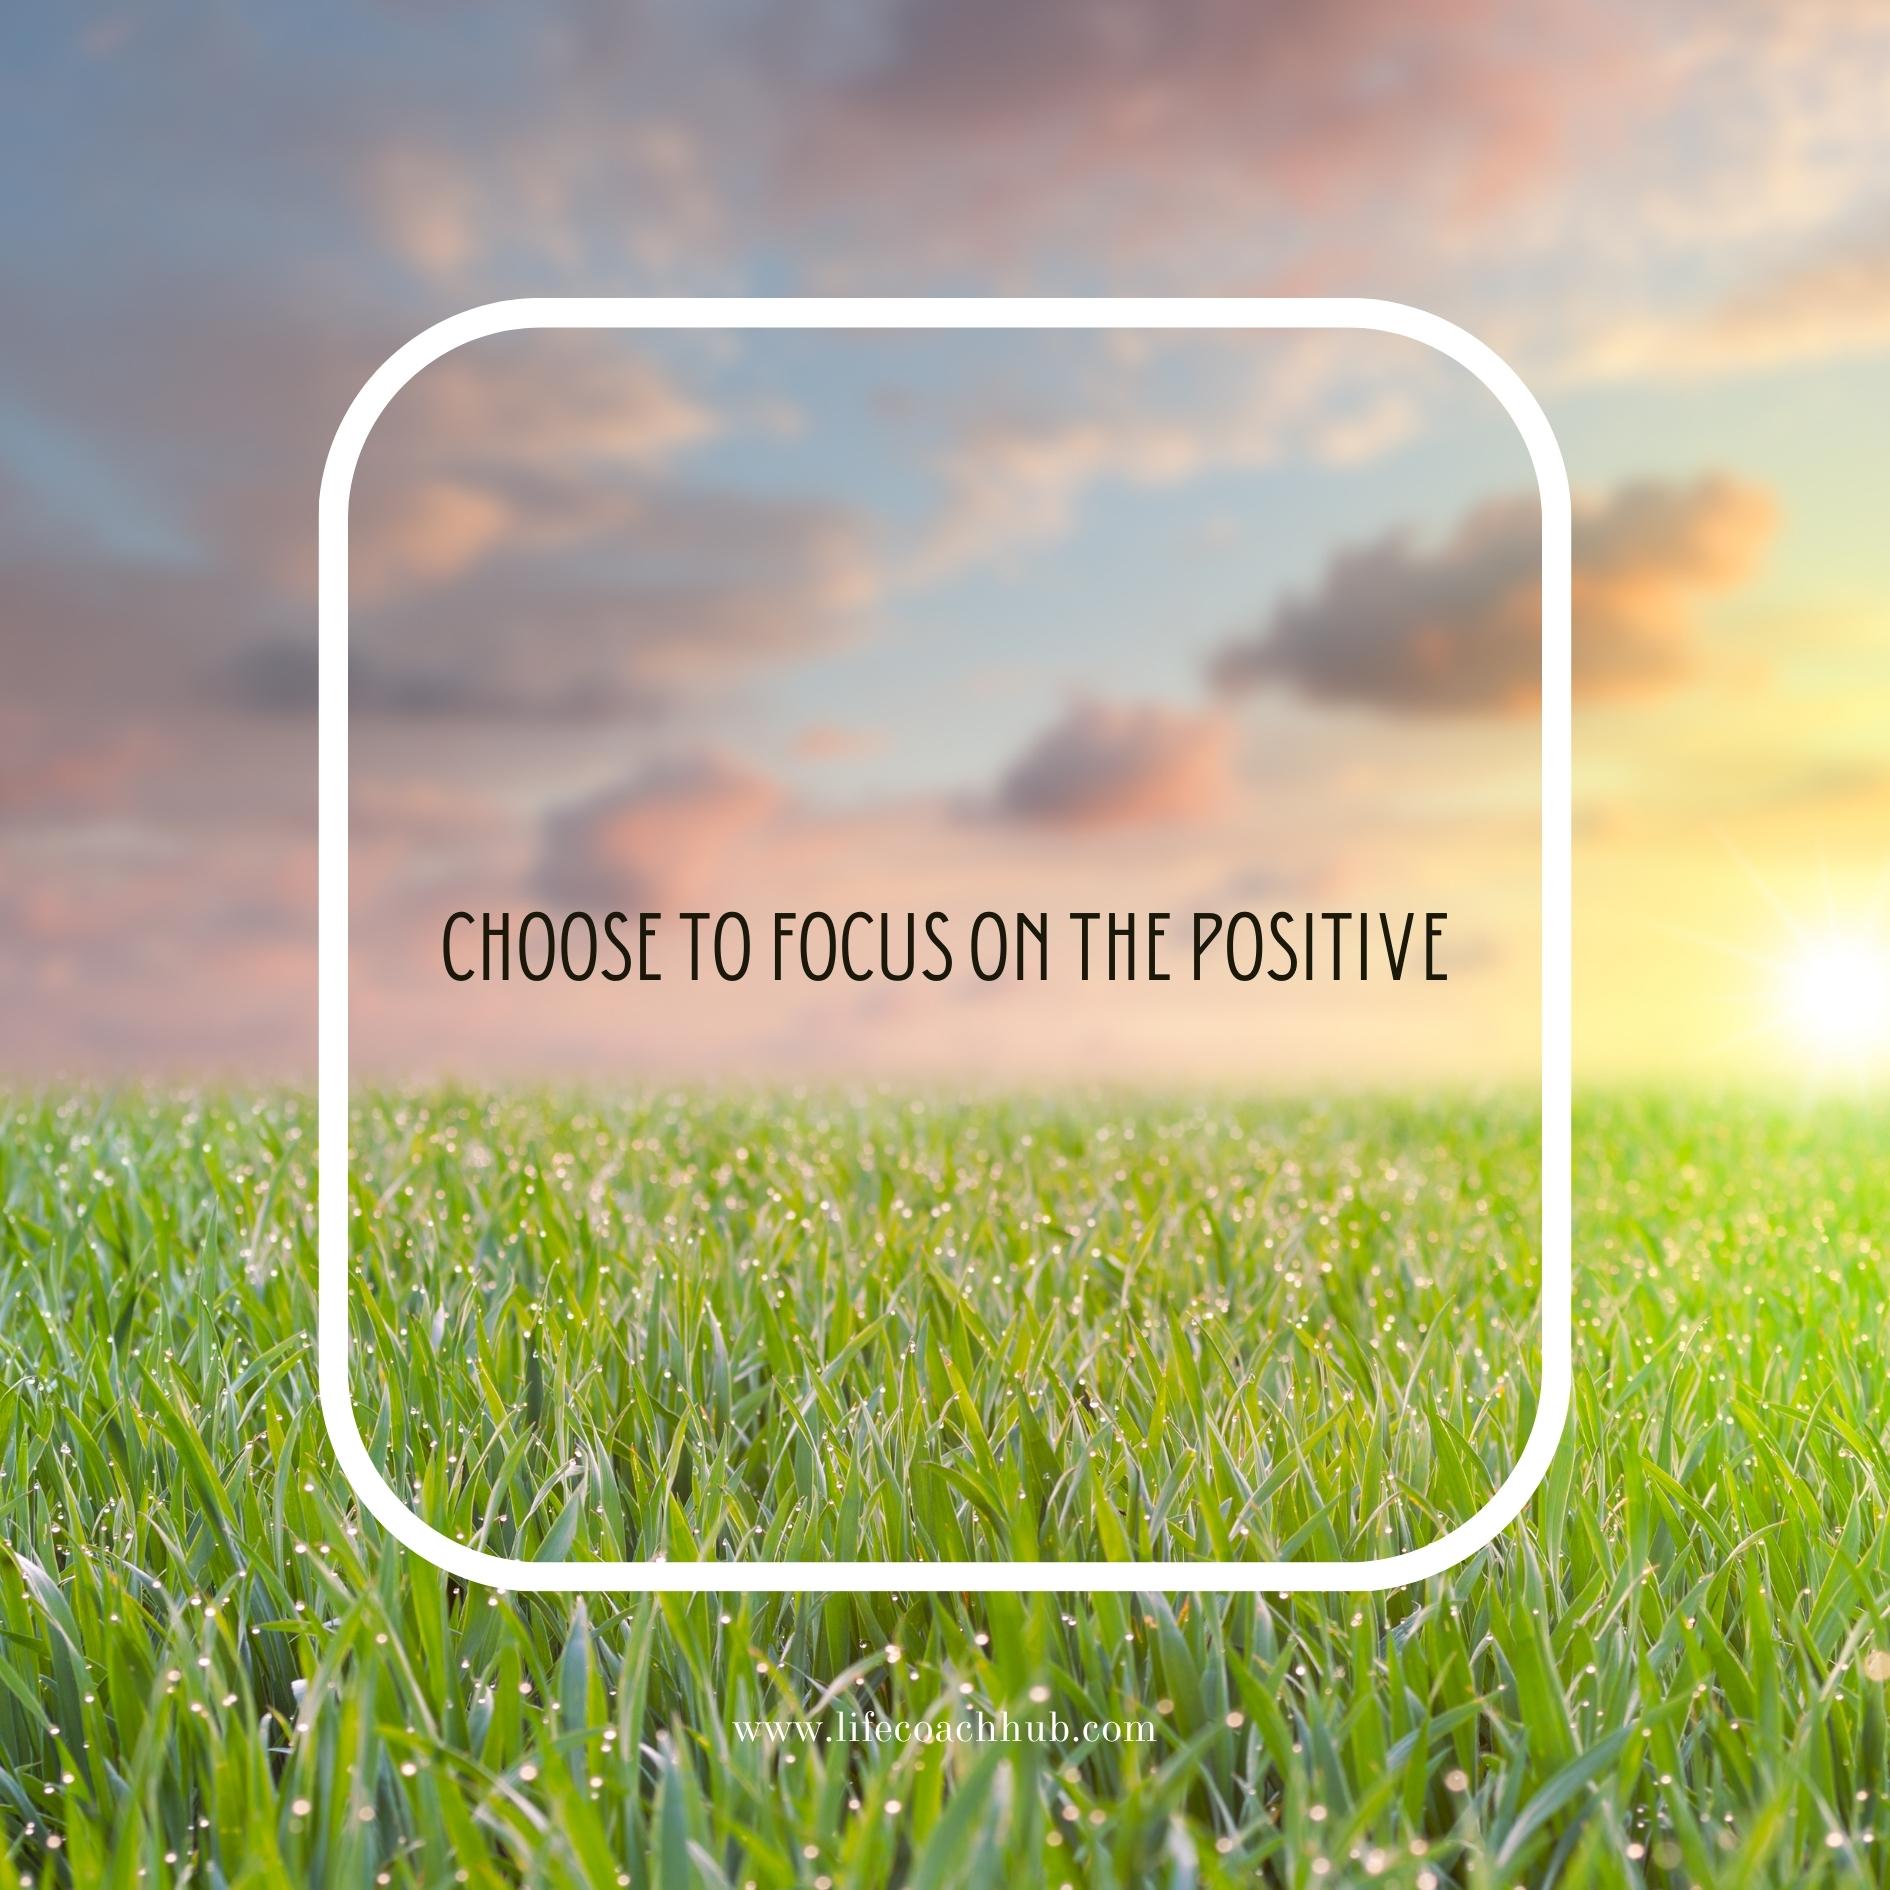 Choose to focus on the positive